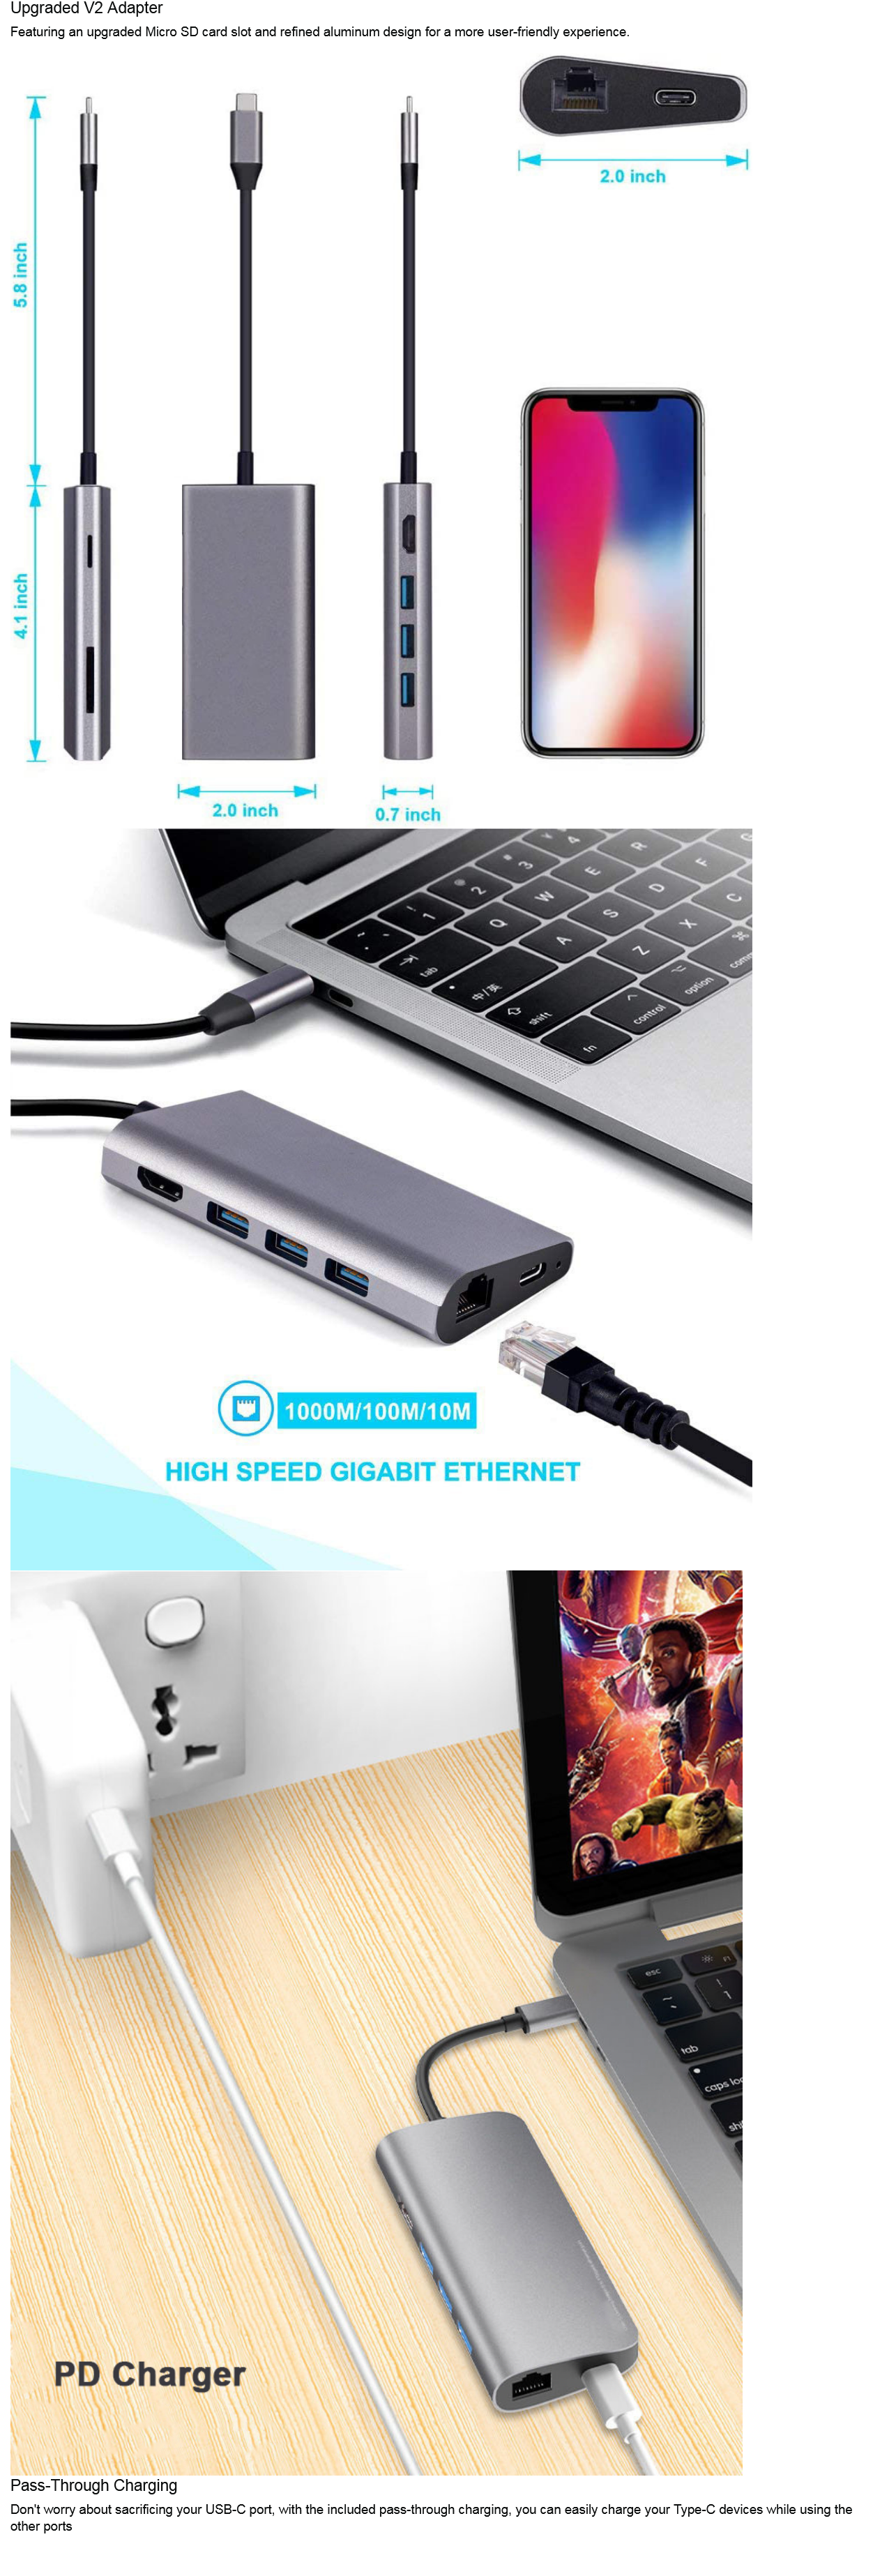 8 In 1 Multiport USB C Hub - BMCE 053 - IdeaStage Promotional Products